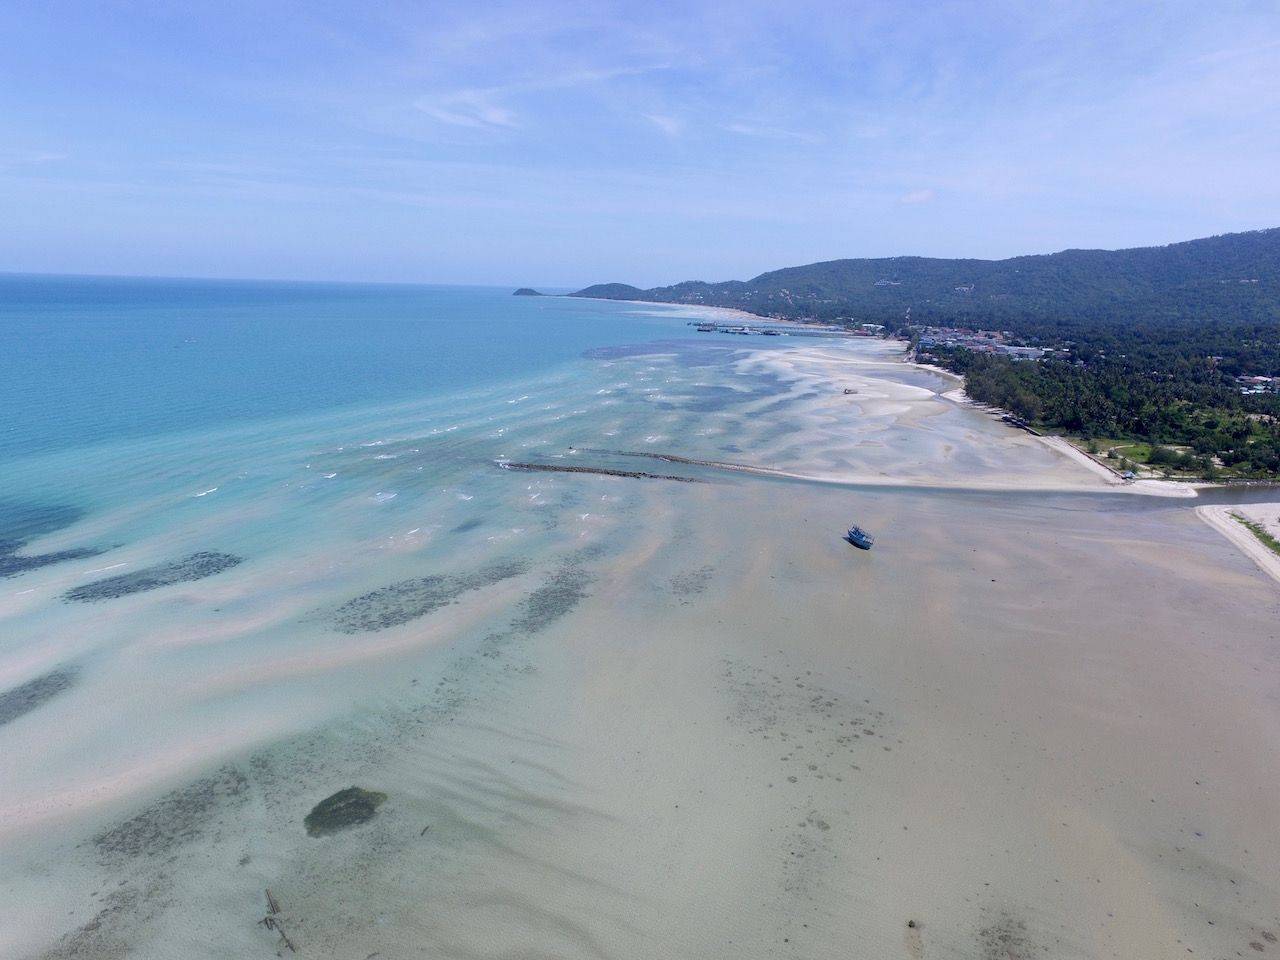  Beach Front Land For Sale – With Development Plans – Lipa Noi, Samui:  Beach Front Land For Sale – With Development Plans – Lipa Noi, Samui